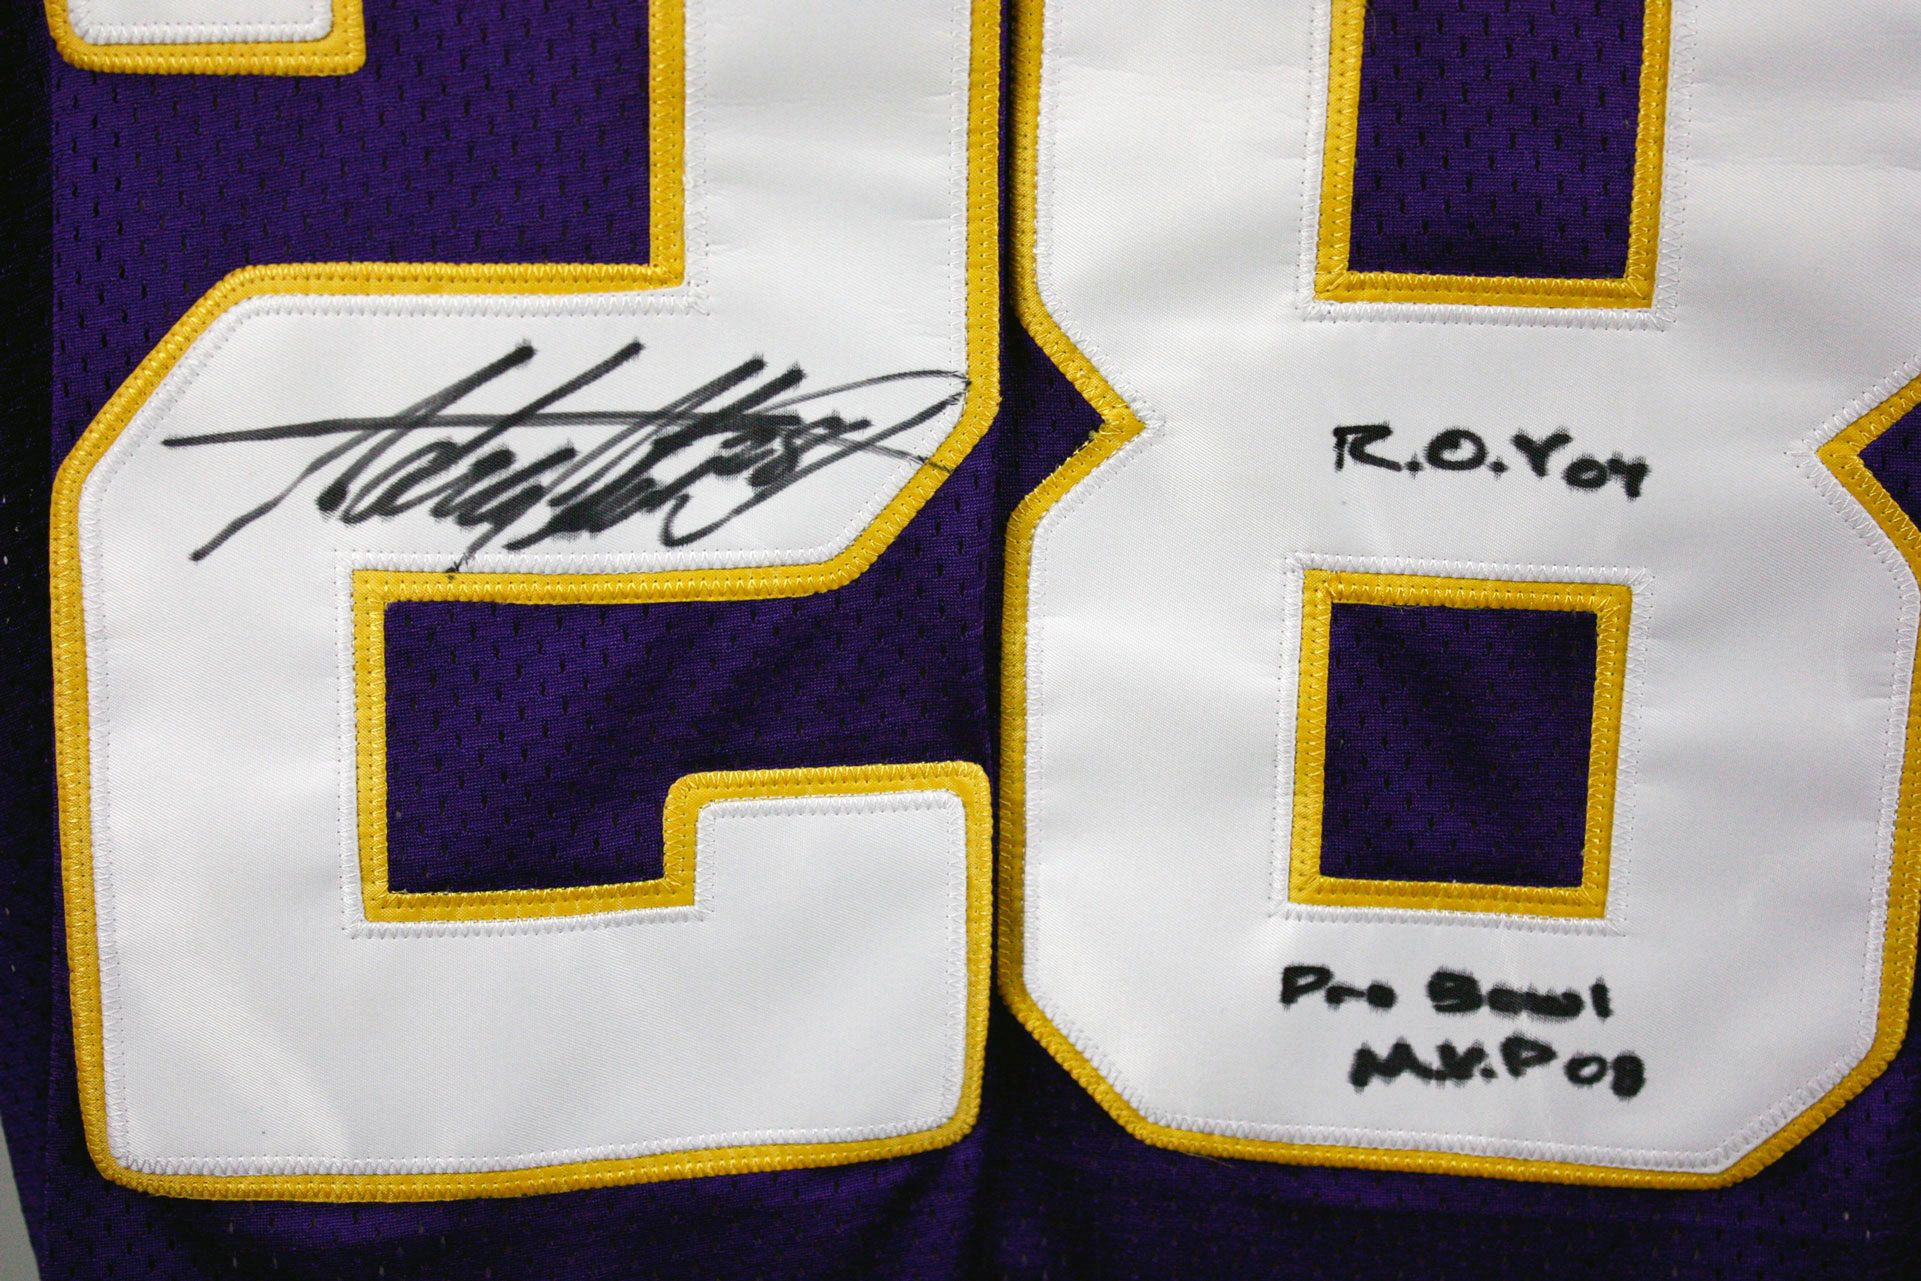 adrian peterson autographed jersey